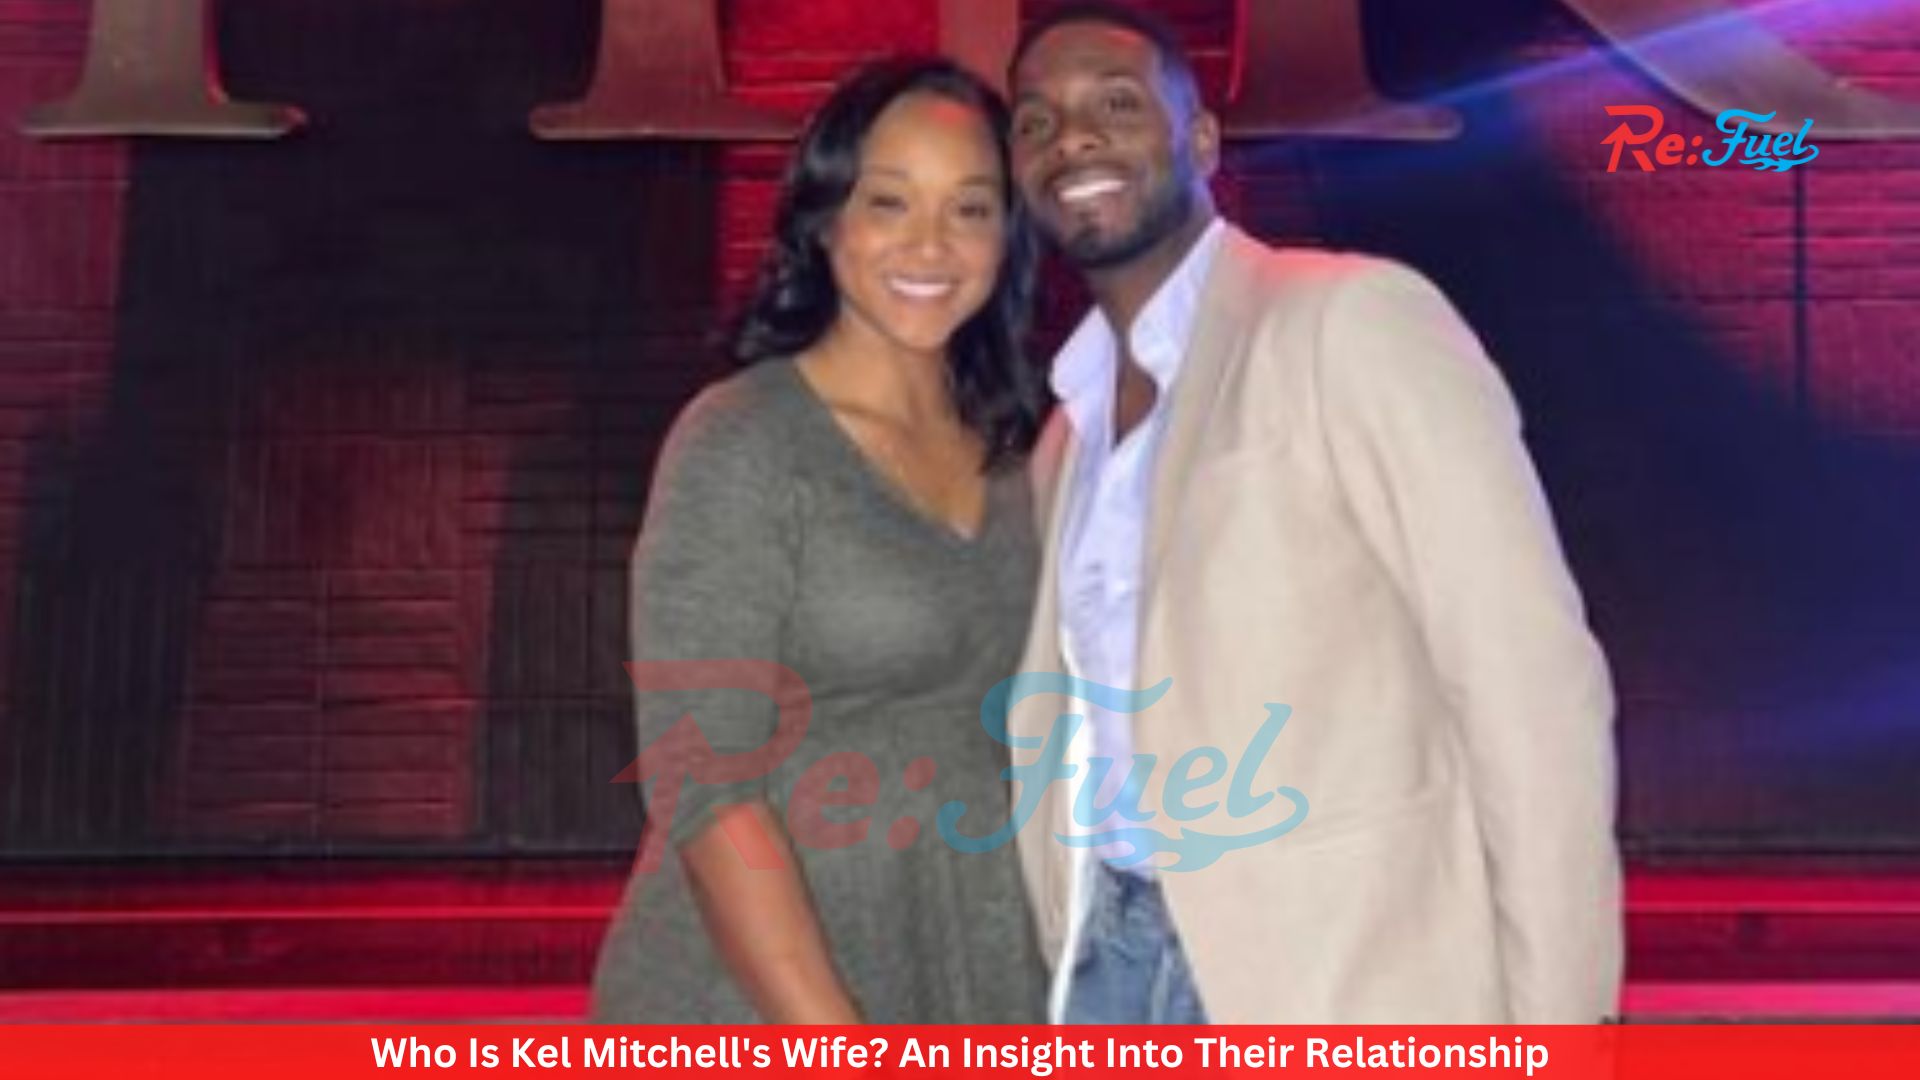 Who Is Kel Mitchell's Wife? An Insight Into Their Relationship